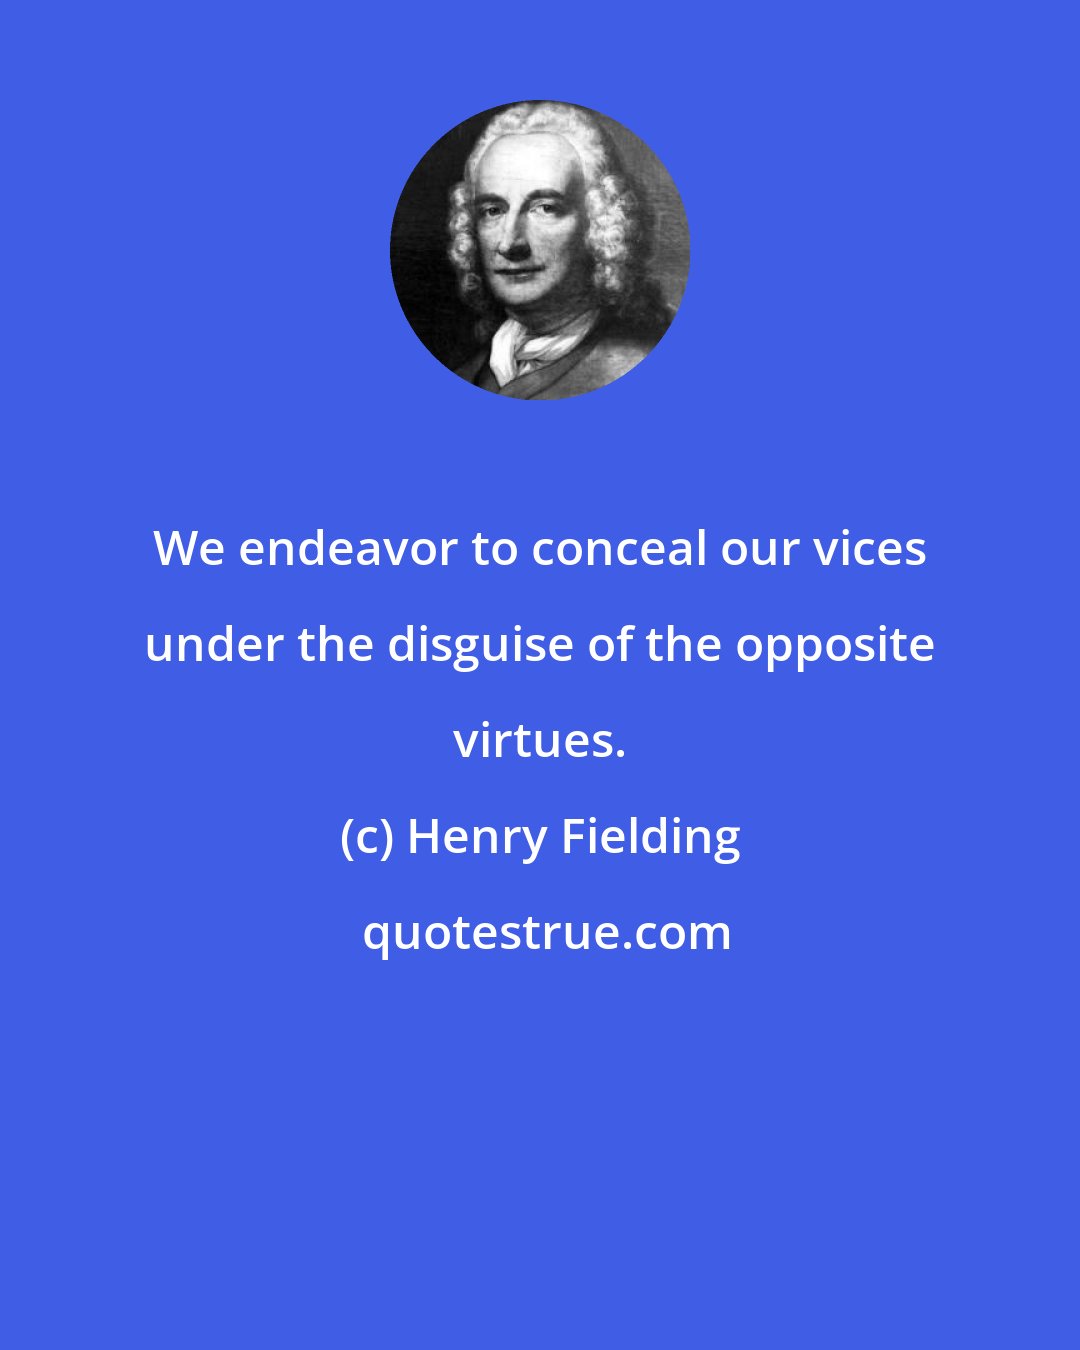 Henry Fielding: We endeavor to conceal our vices under the disguise of the opposite virtues.